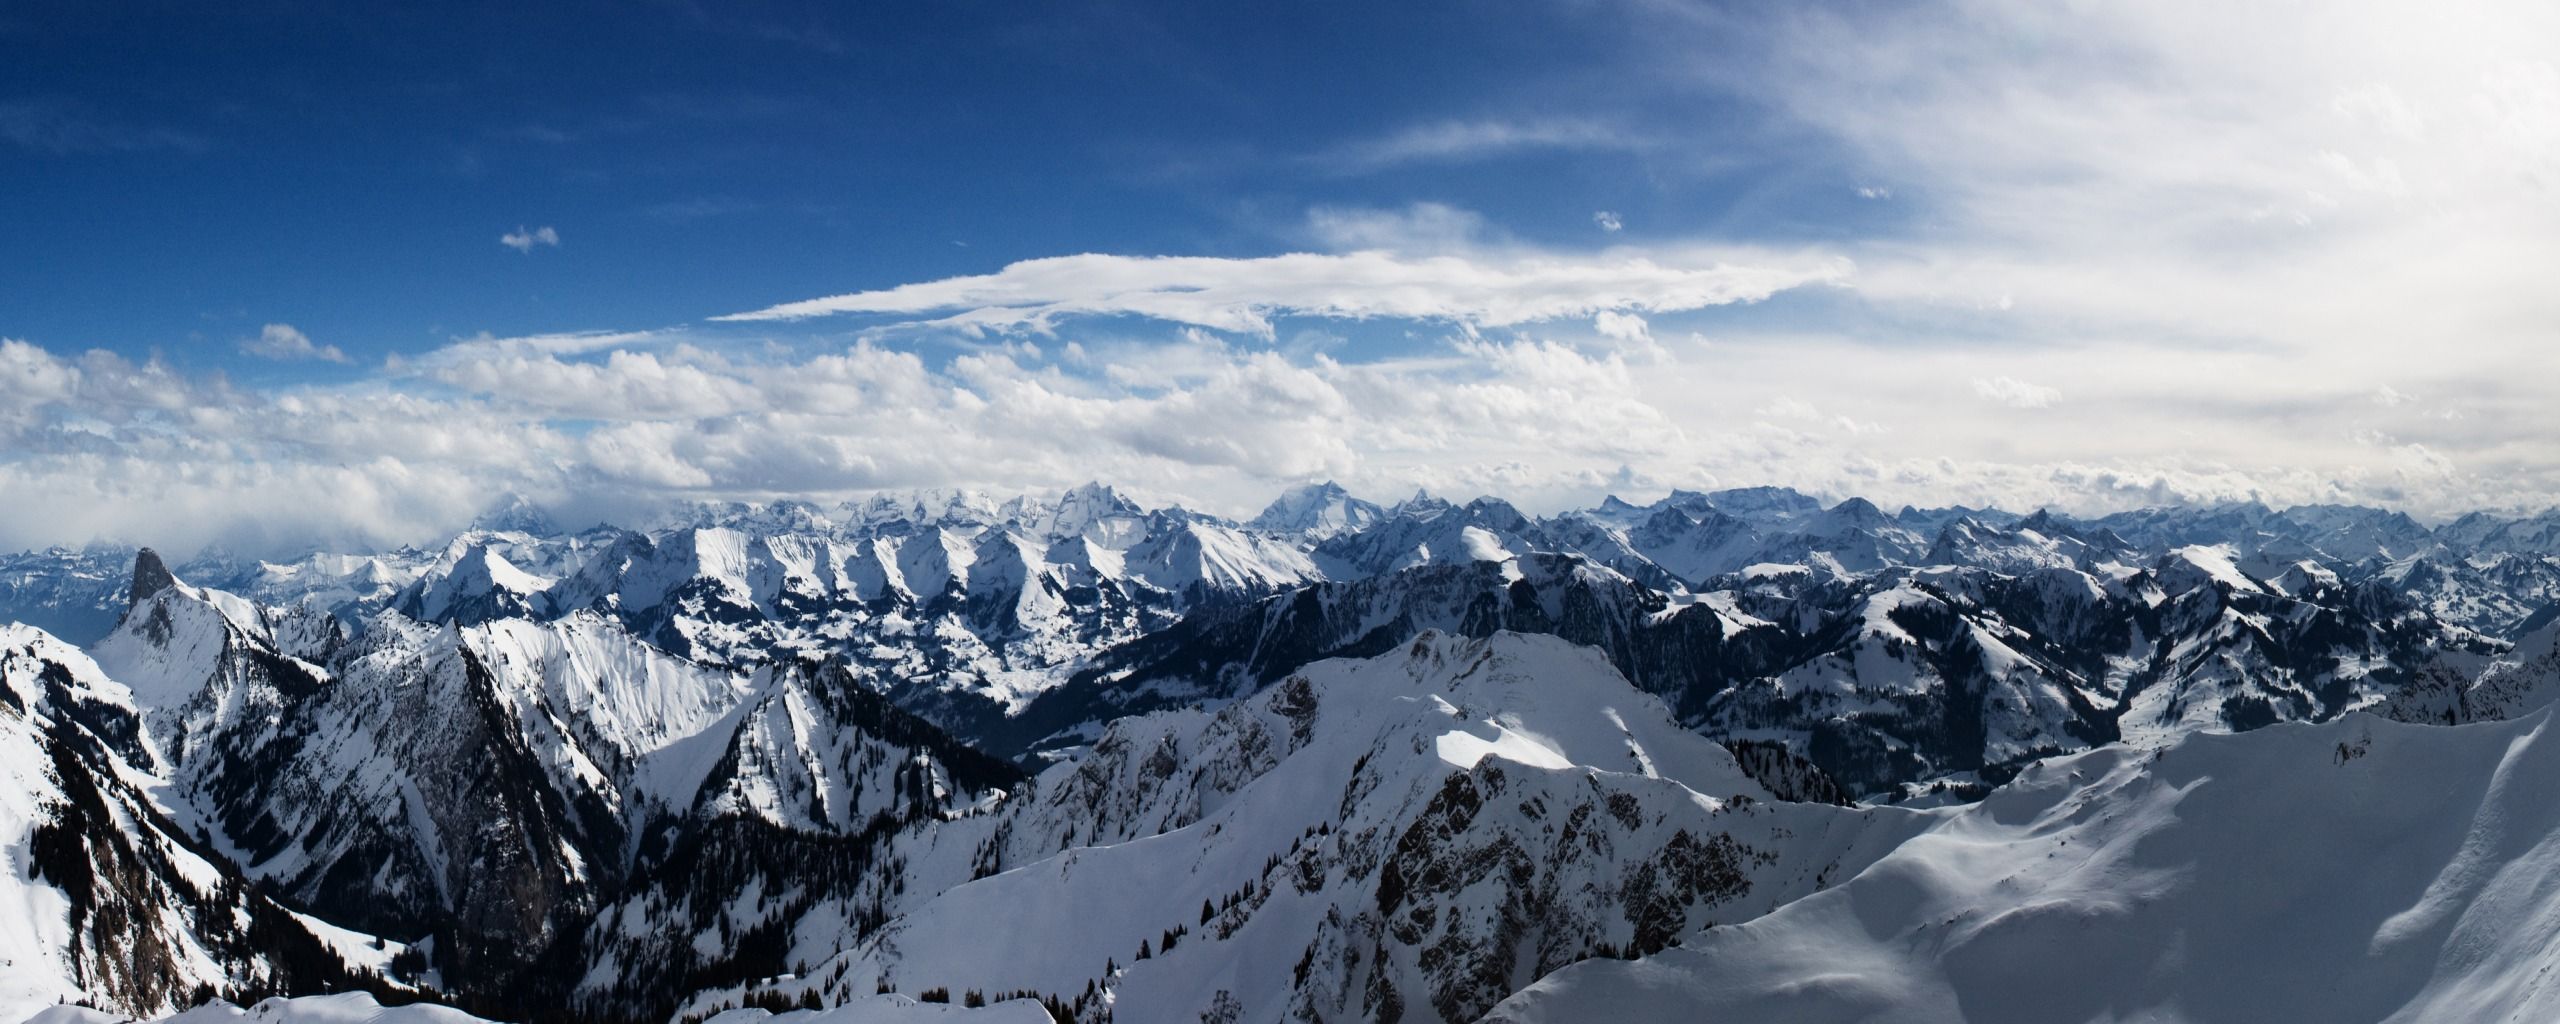 Alps Mountains Dual Monitor Wallpapers HD Backgrounds